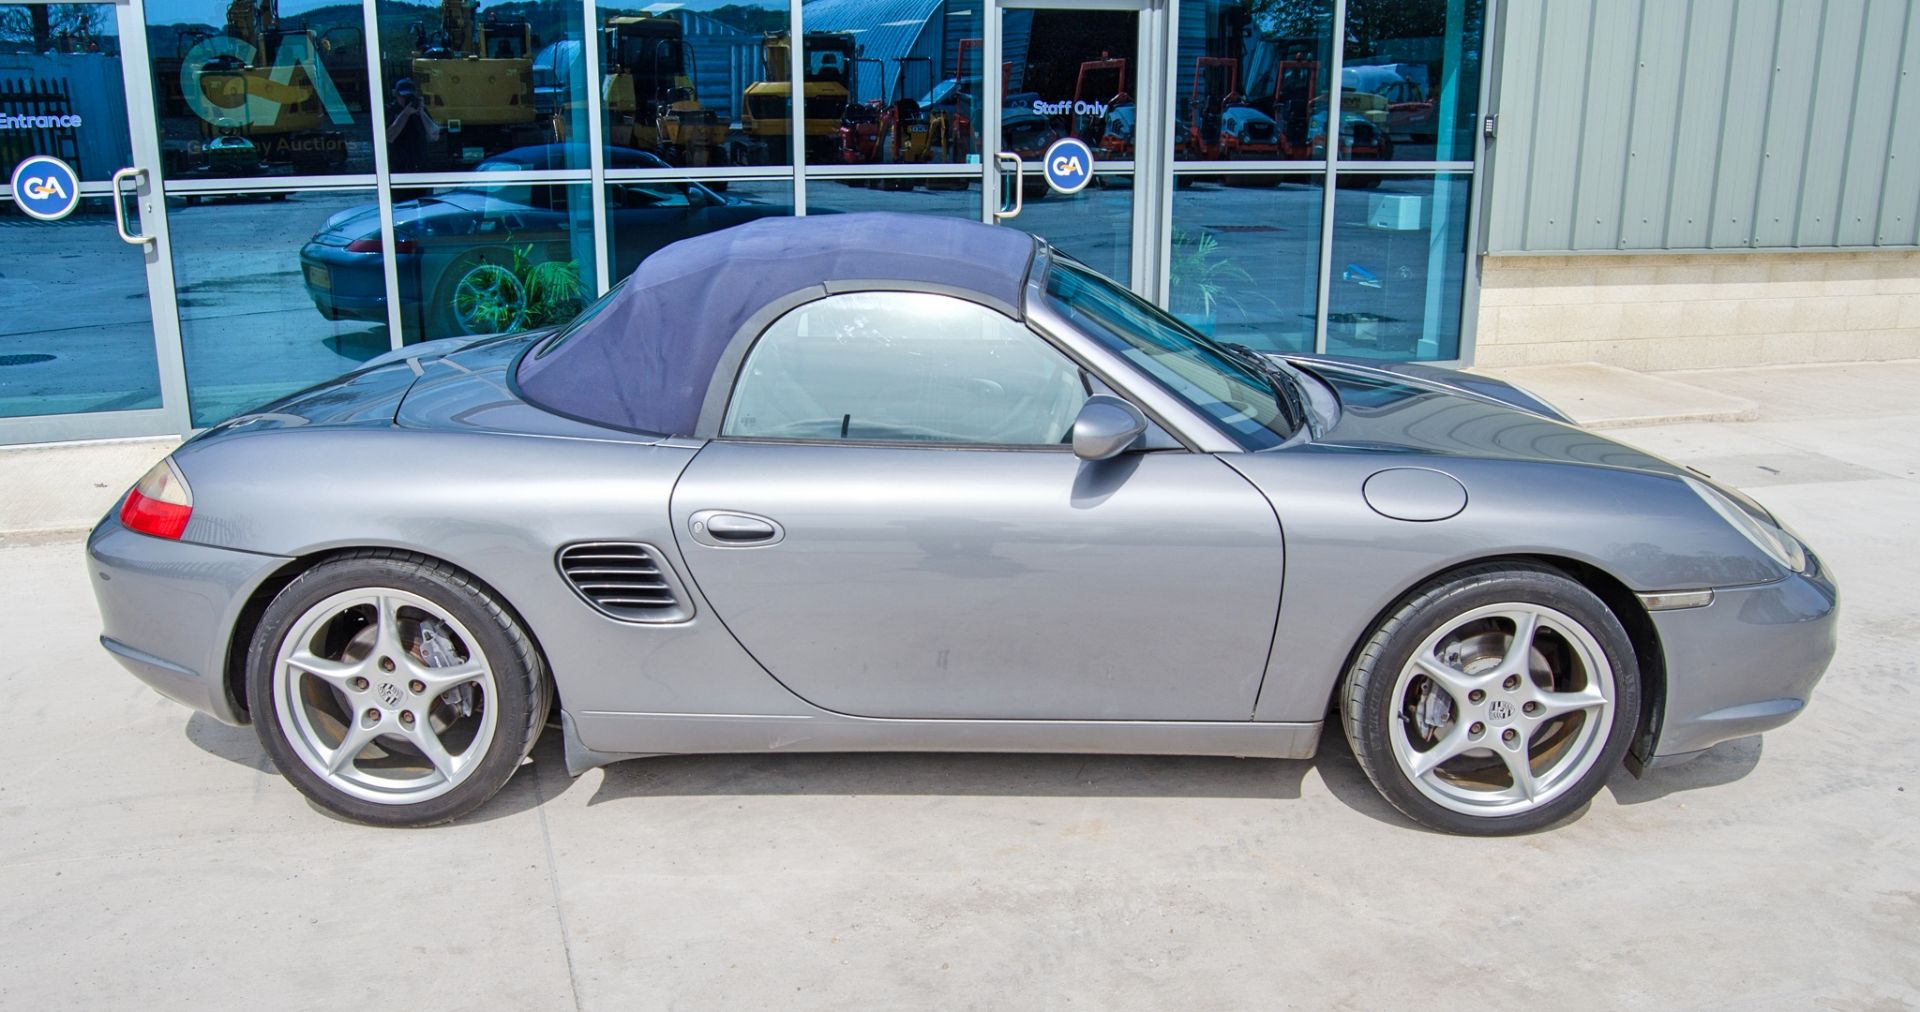 2003 Porsche Boxster 2.7 5 speed manual convertible roadster - Image 30 of 50